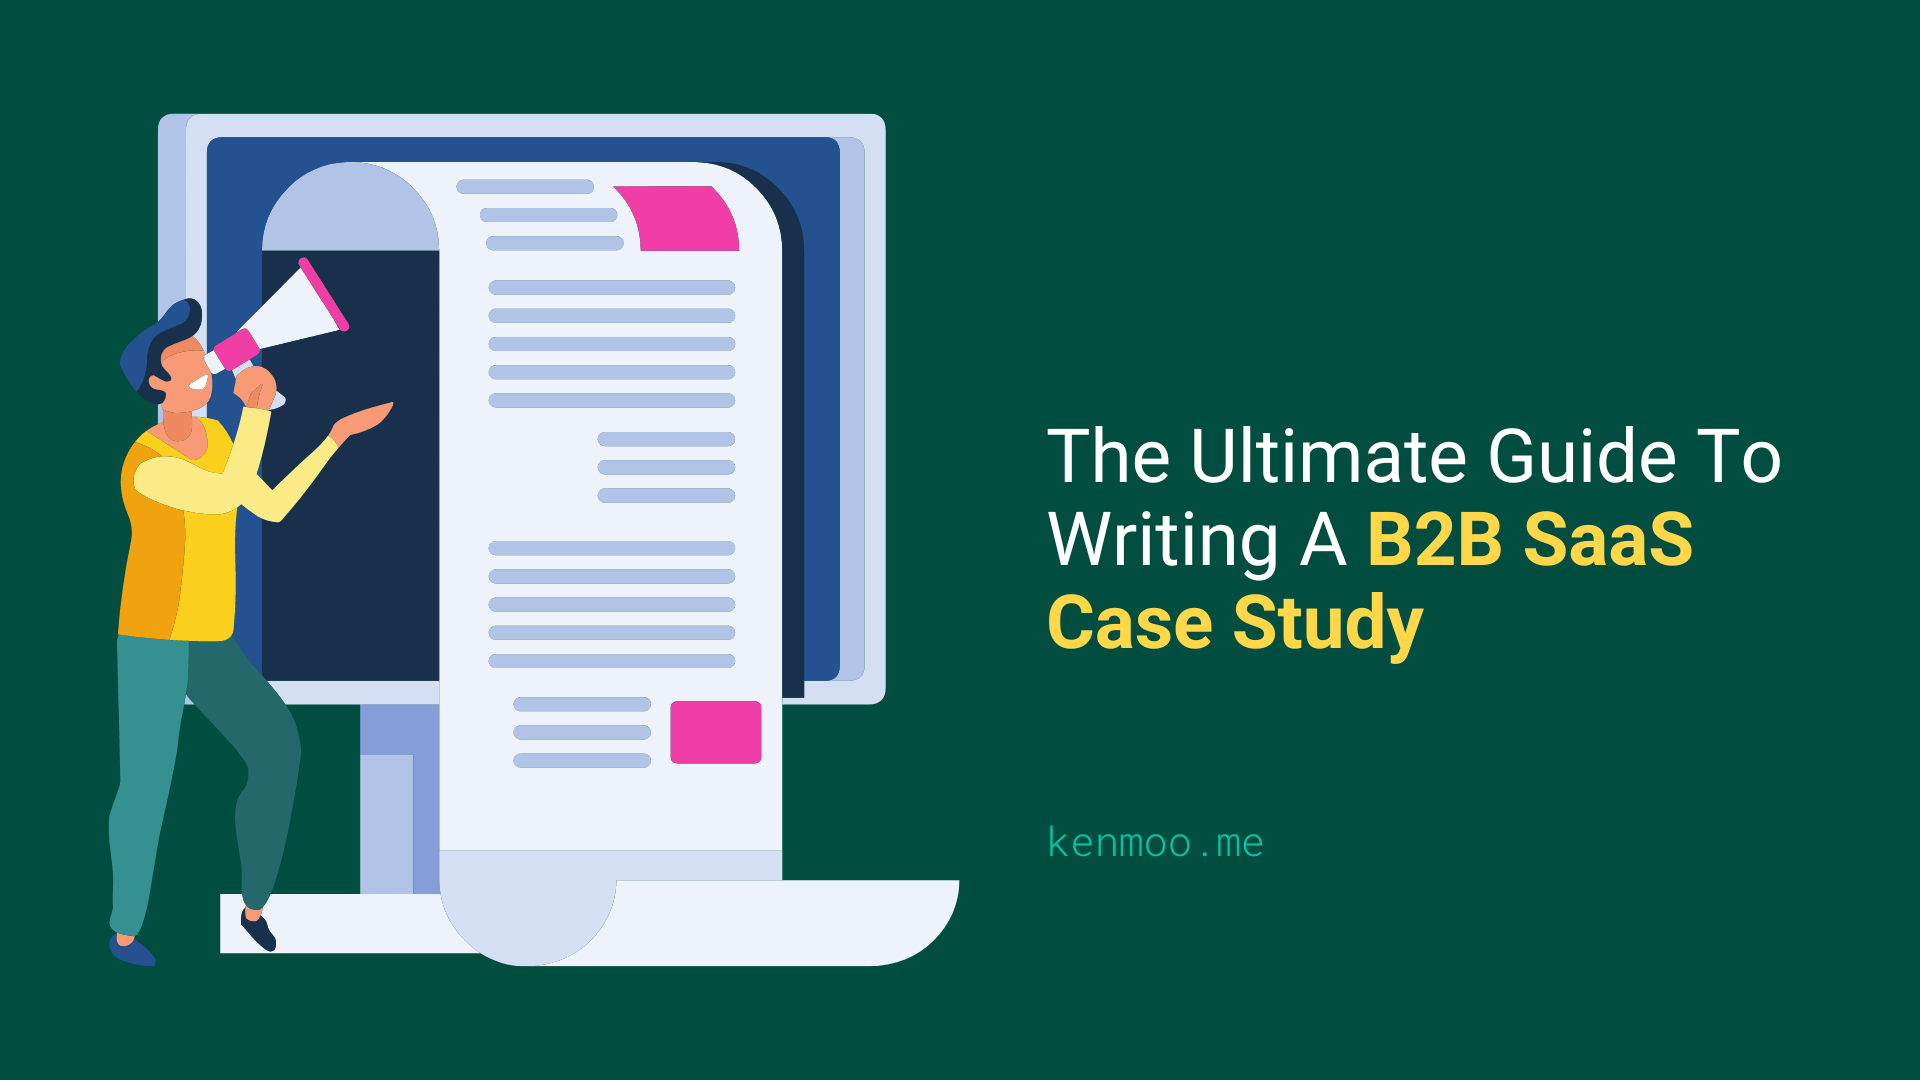 The Ultimate Guide To Writing A B2B SaaS Case Study